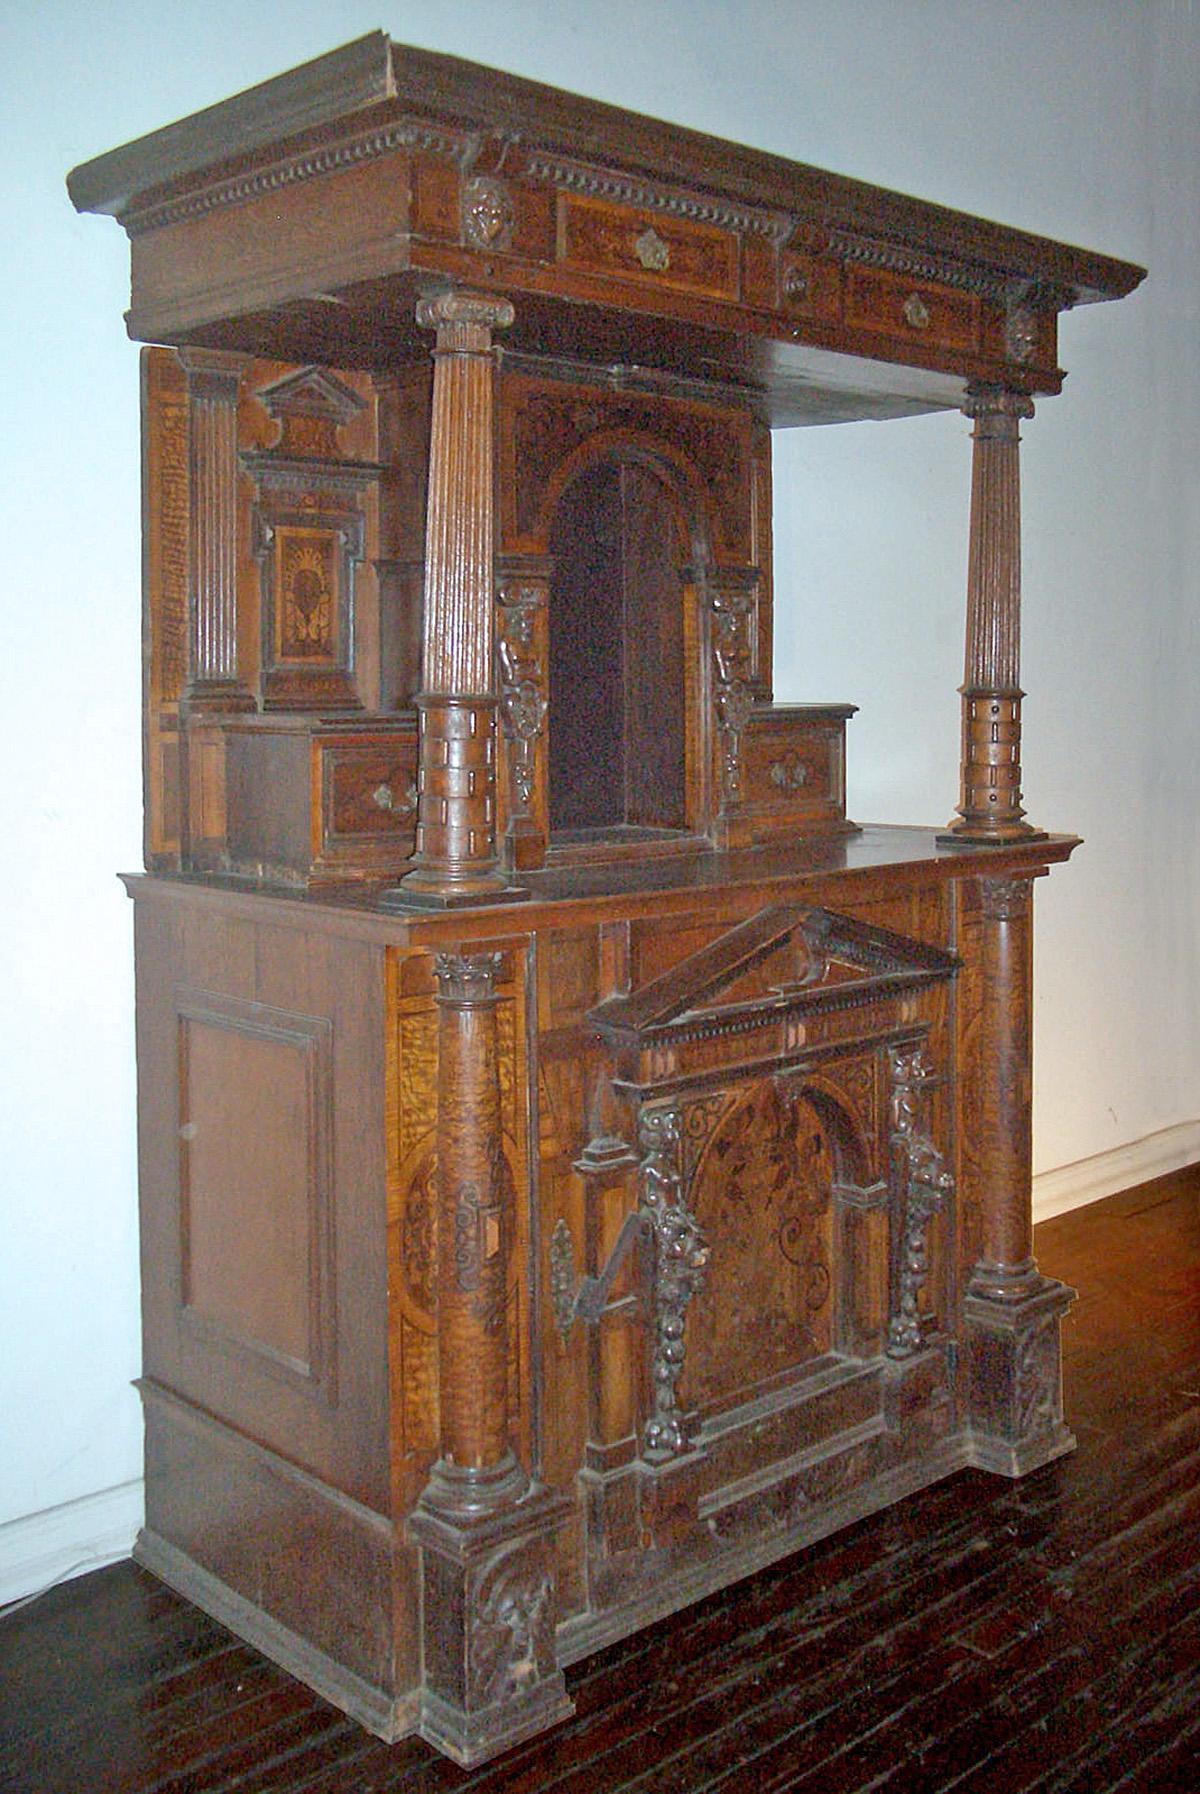 Late Renaissance / Early Baroque Buffet or Dressoir, of Swiss or German origin and dating from the early 17th century. Made of walnut with richly inlaid decorations of fruit wood and maple, and adorned with female and male beautifully carved term